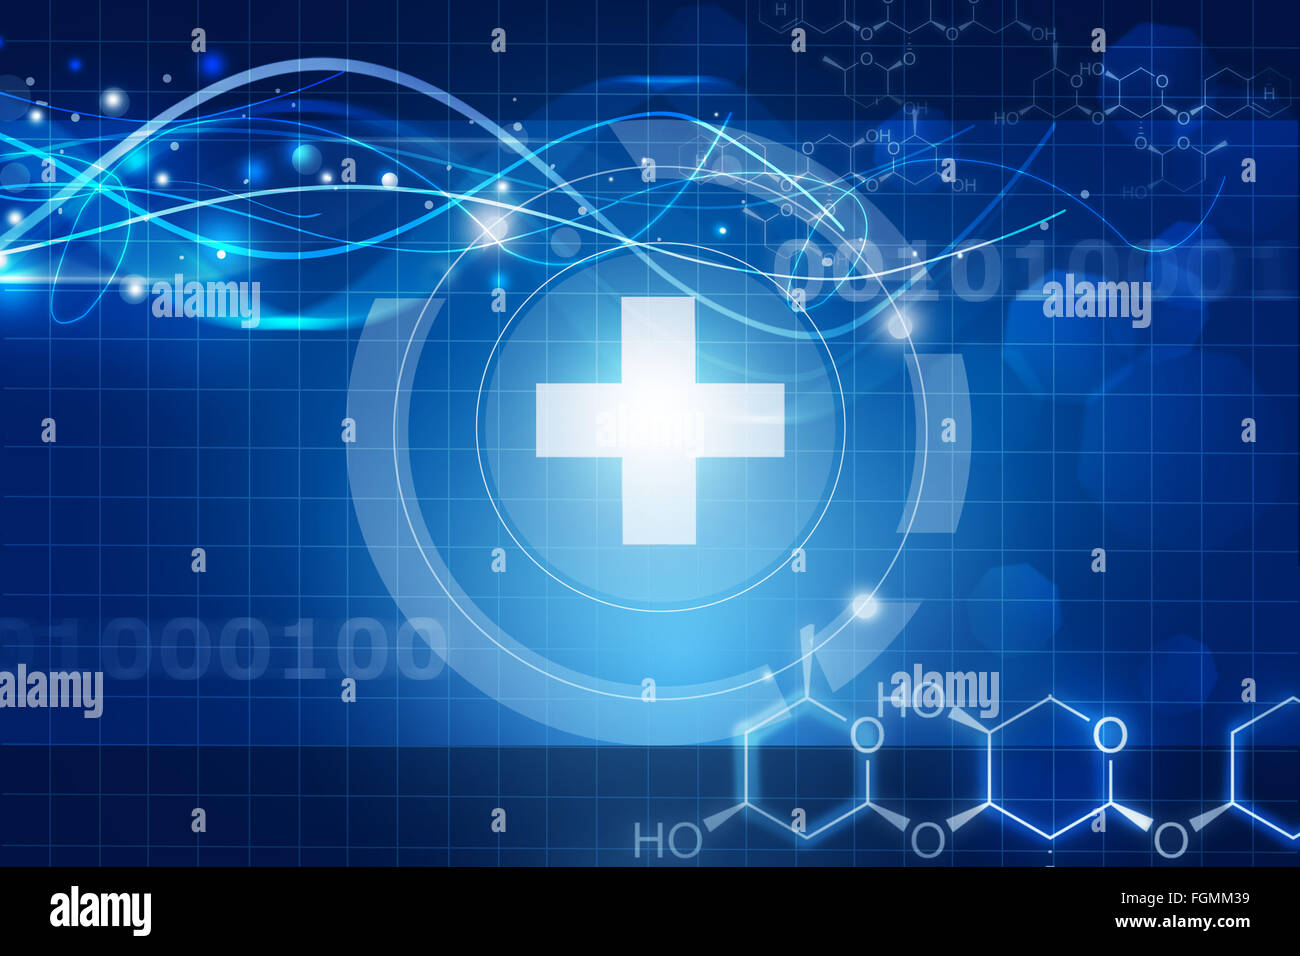 abstract blue medical background Stock Photo